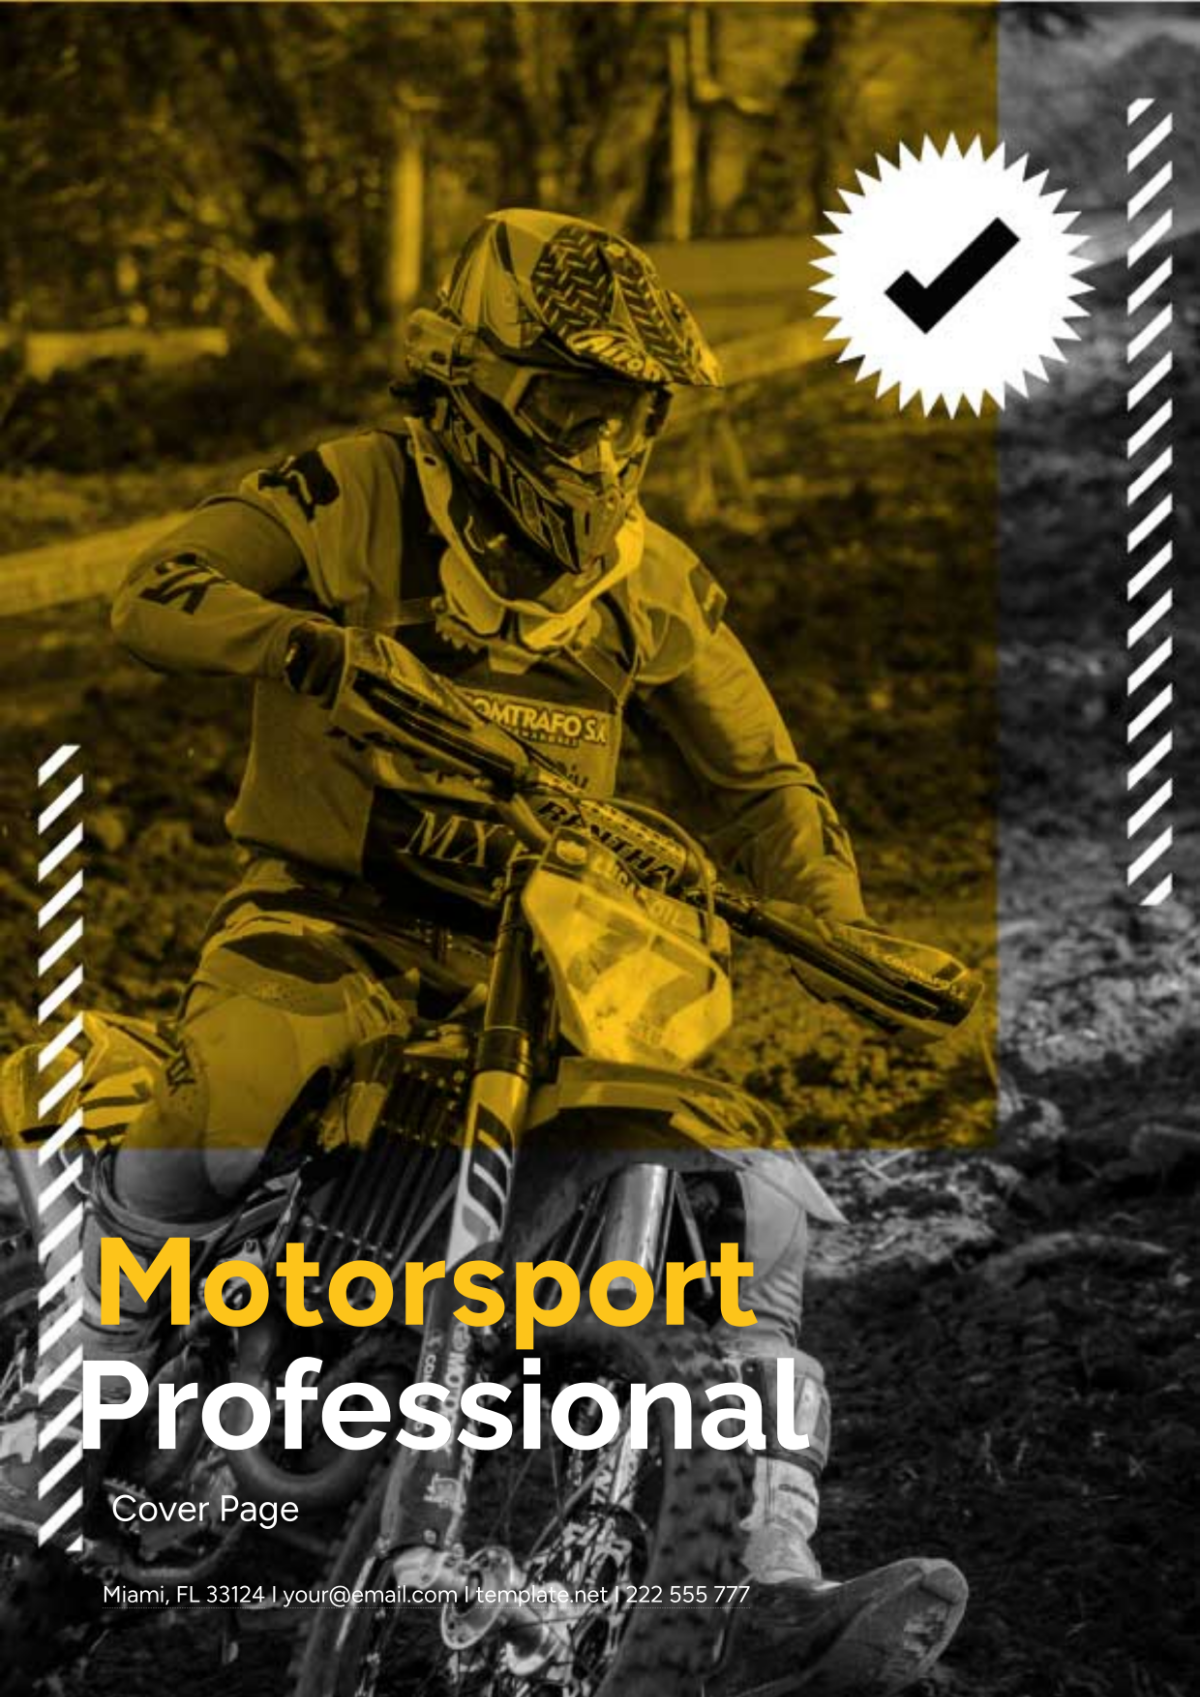 Motorsport Professional Cover Page